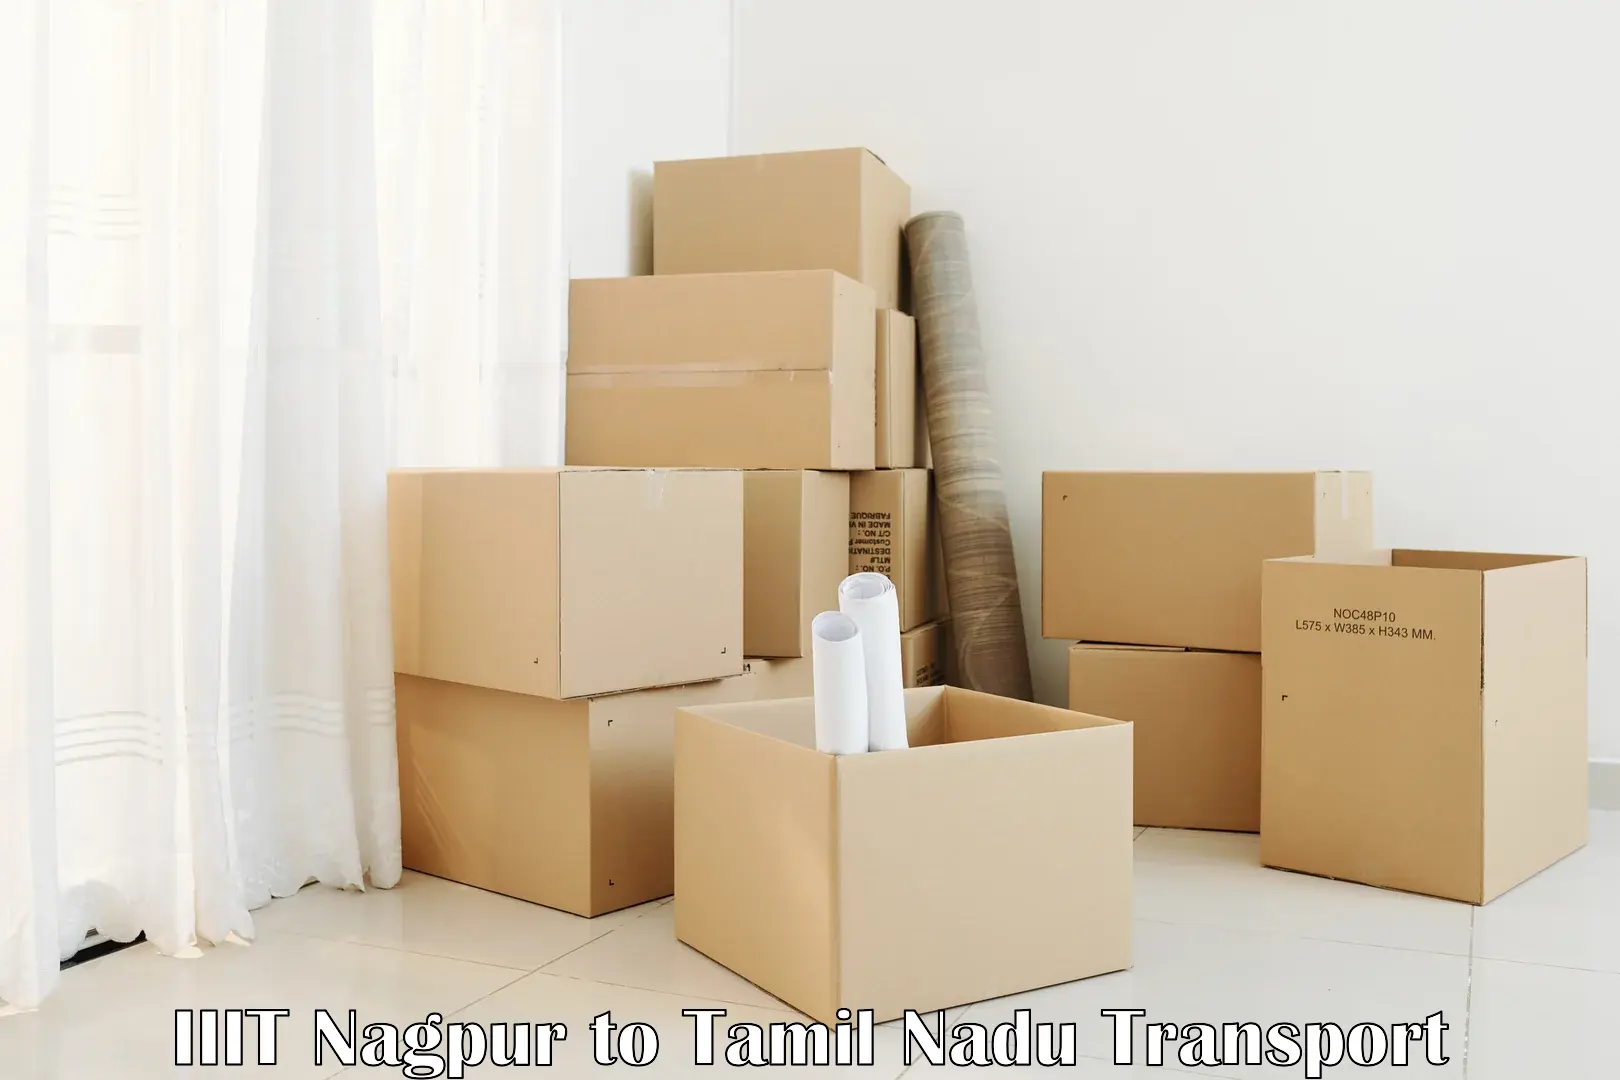 Express transport services IIIT Nagpur to Coimbatore